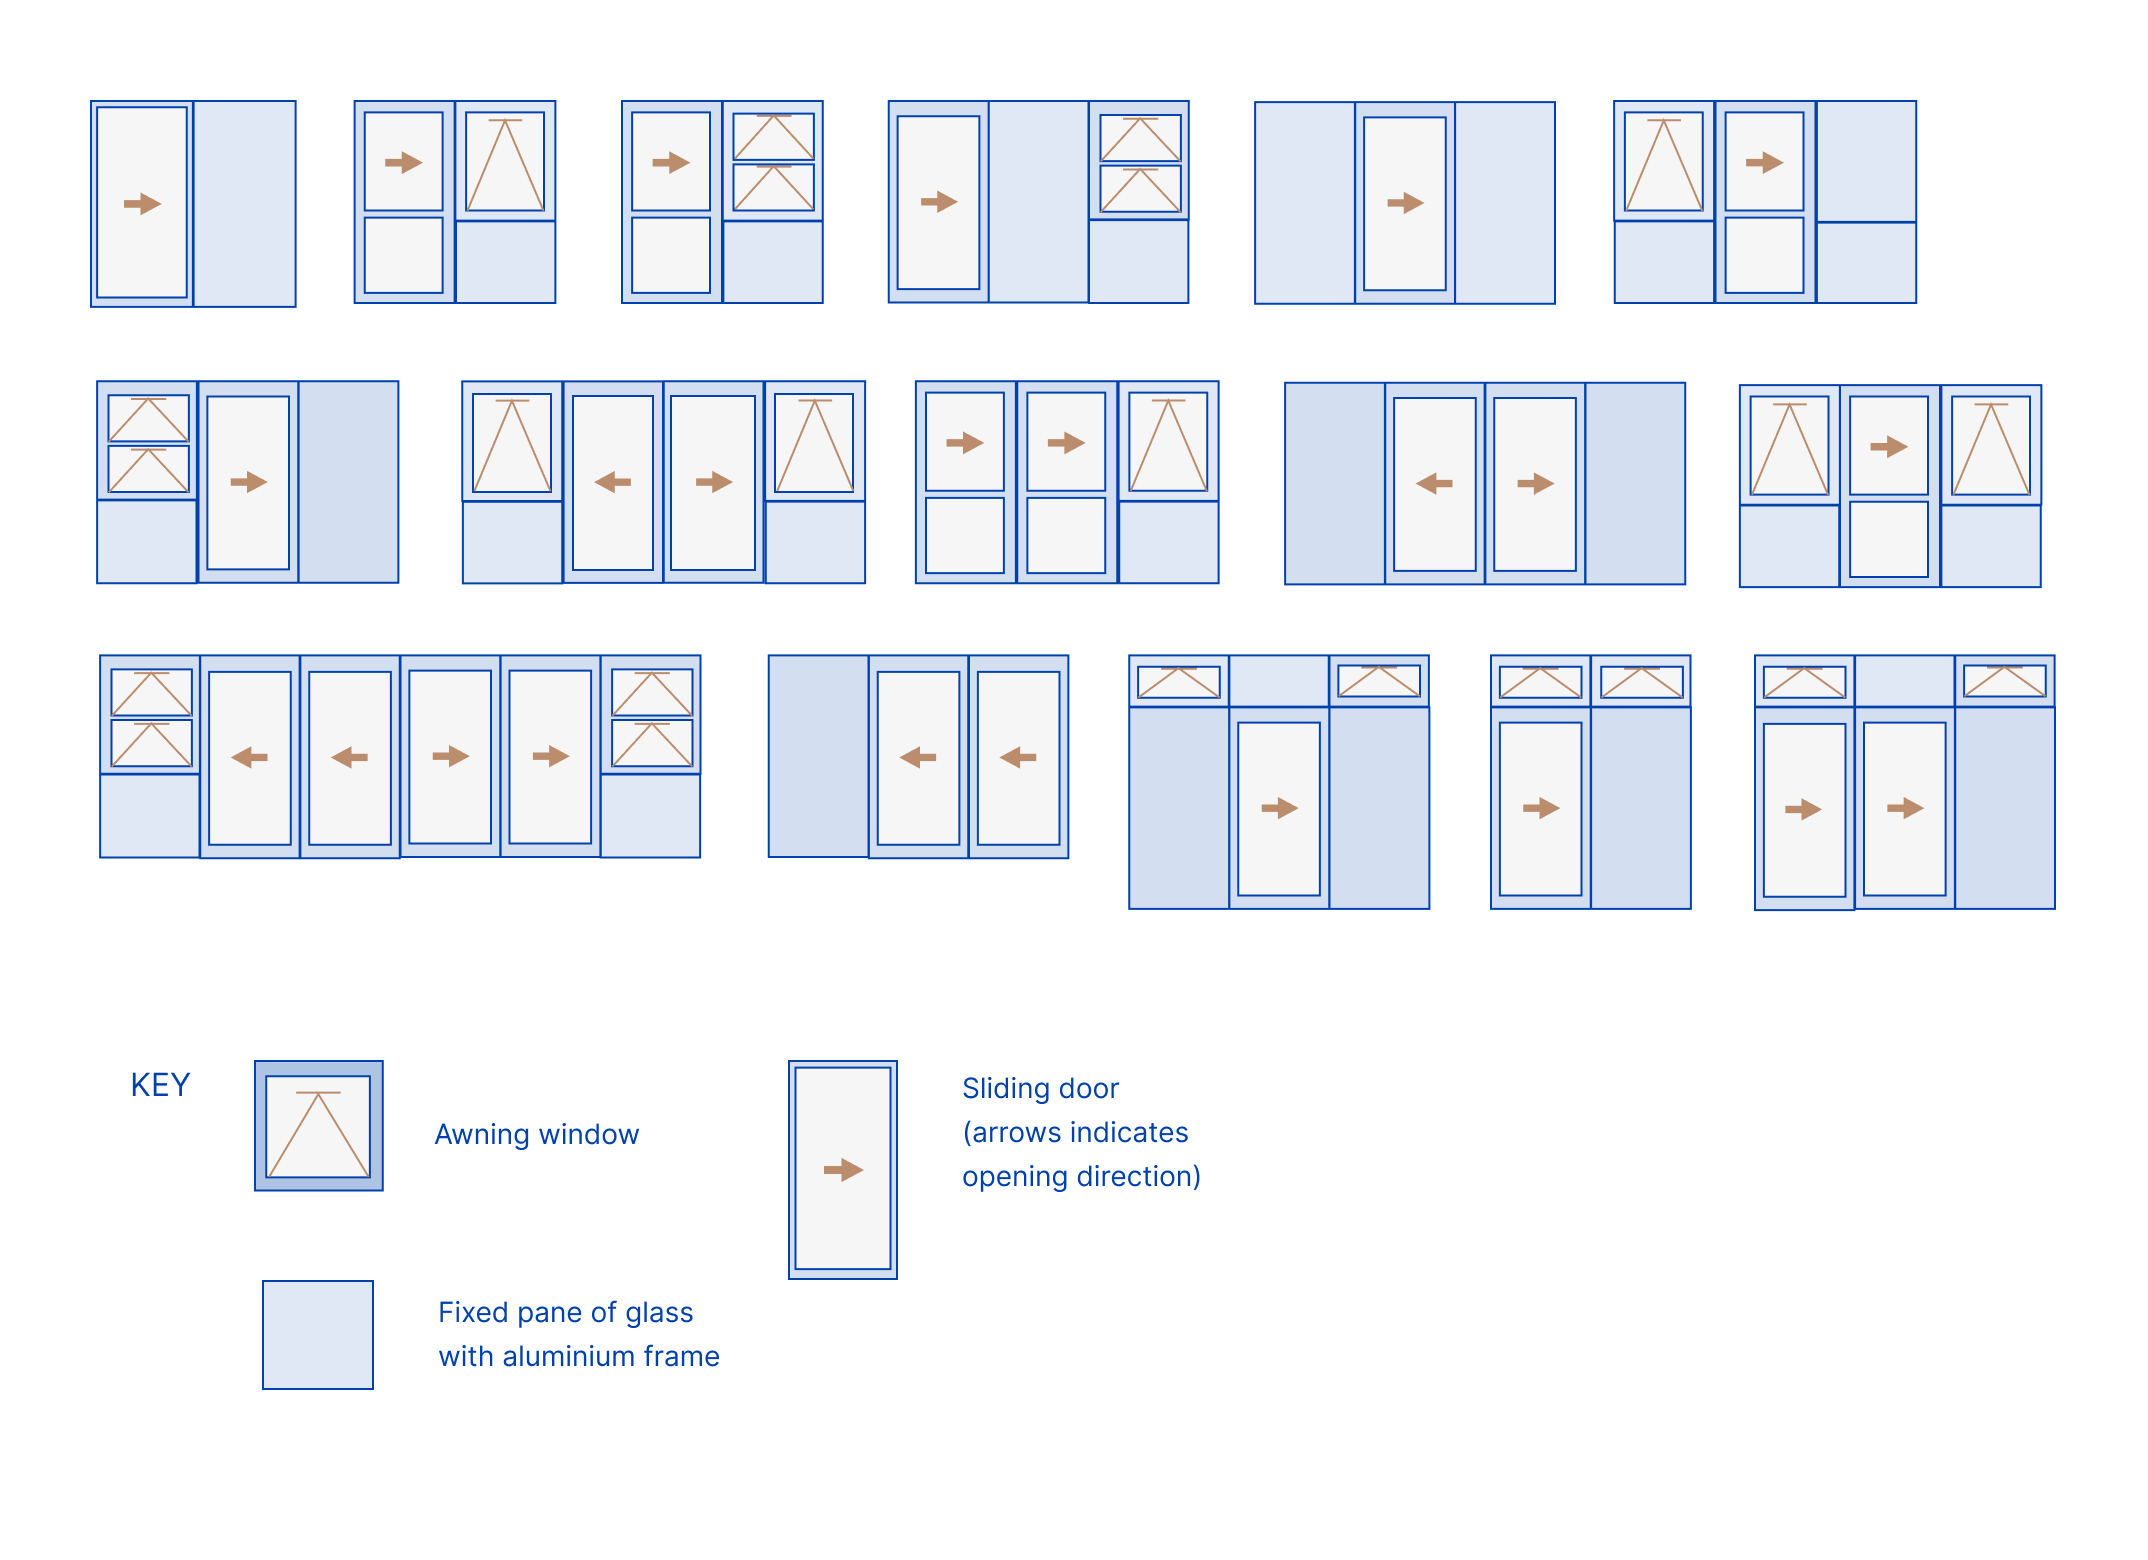 Duco Sliding and Stacking Door option diagrams